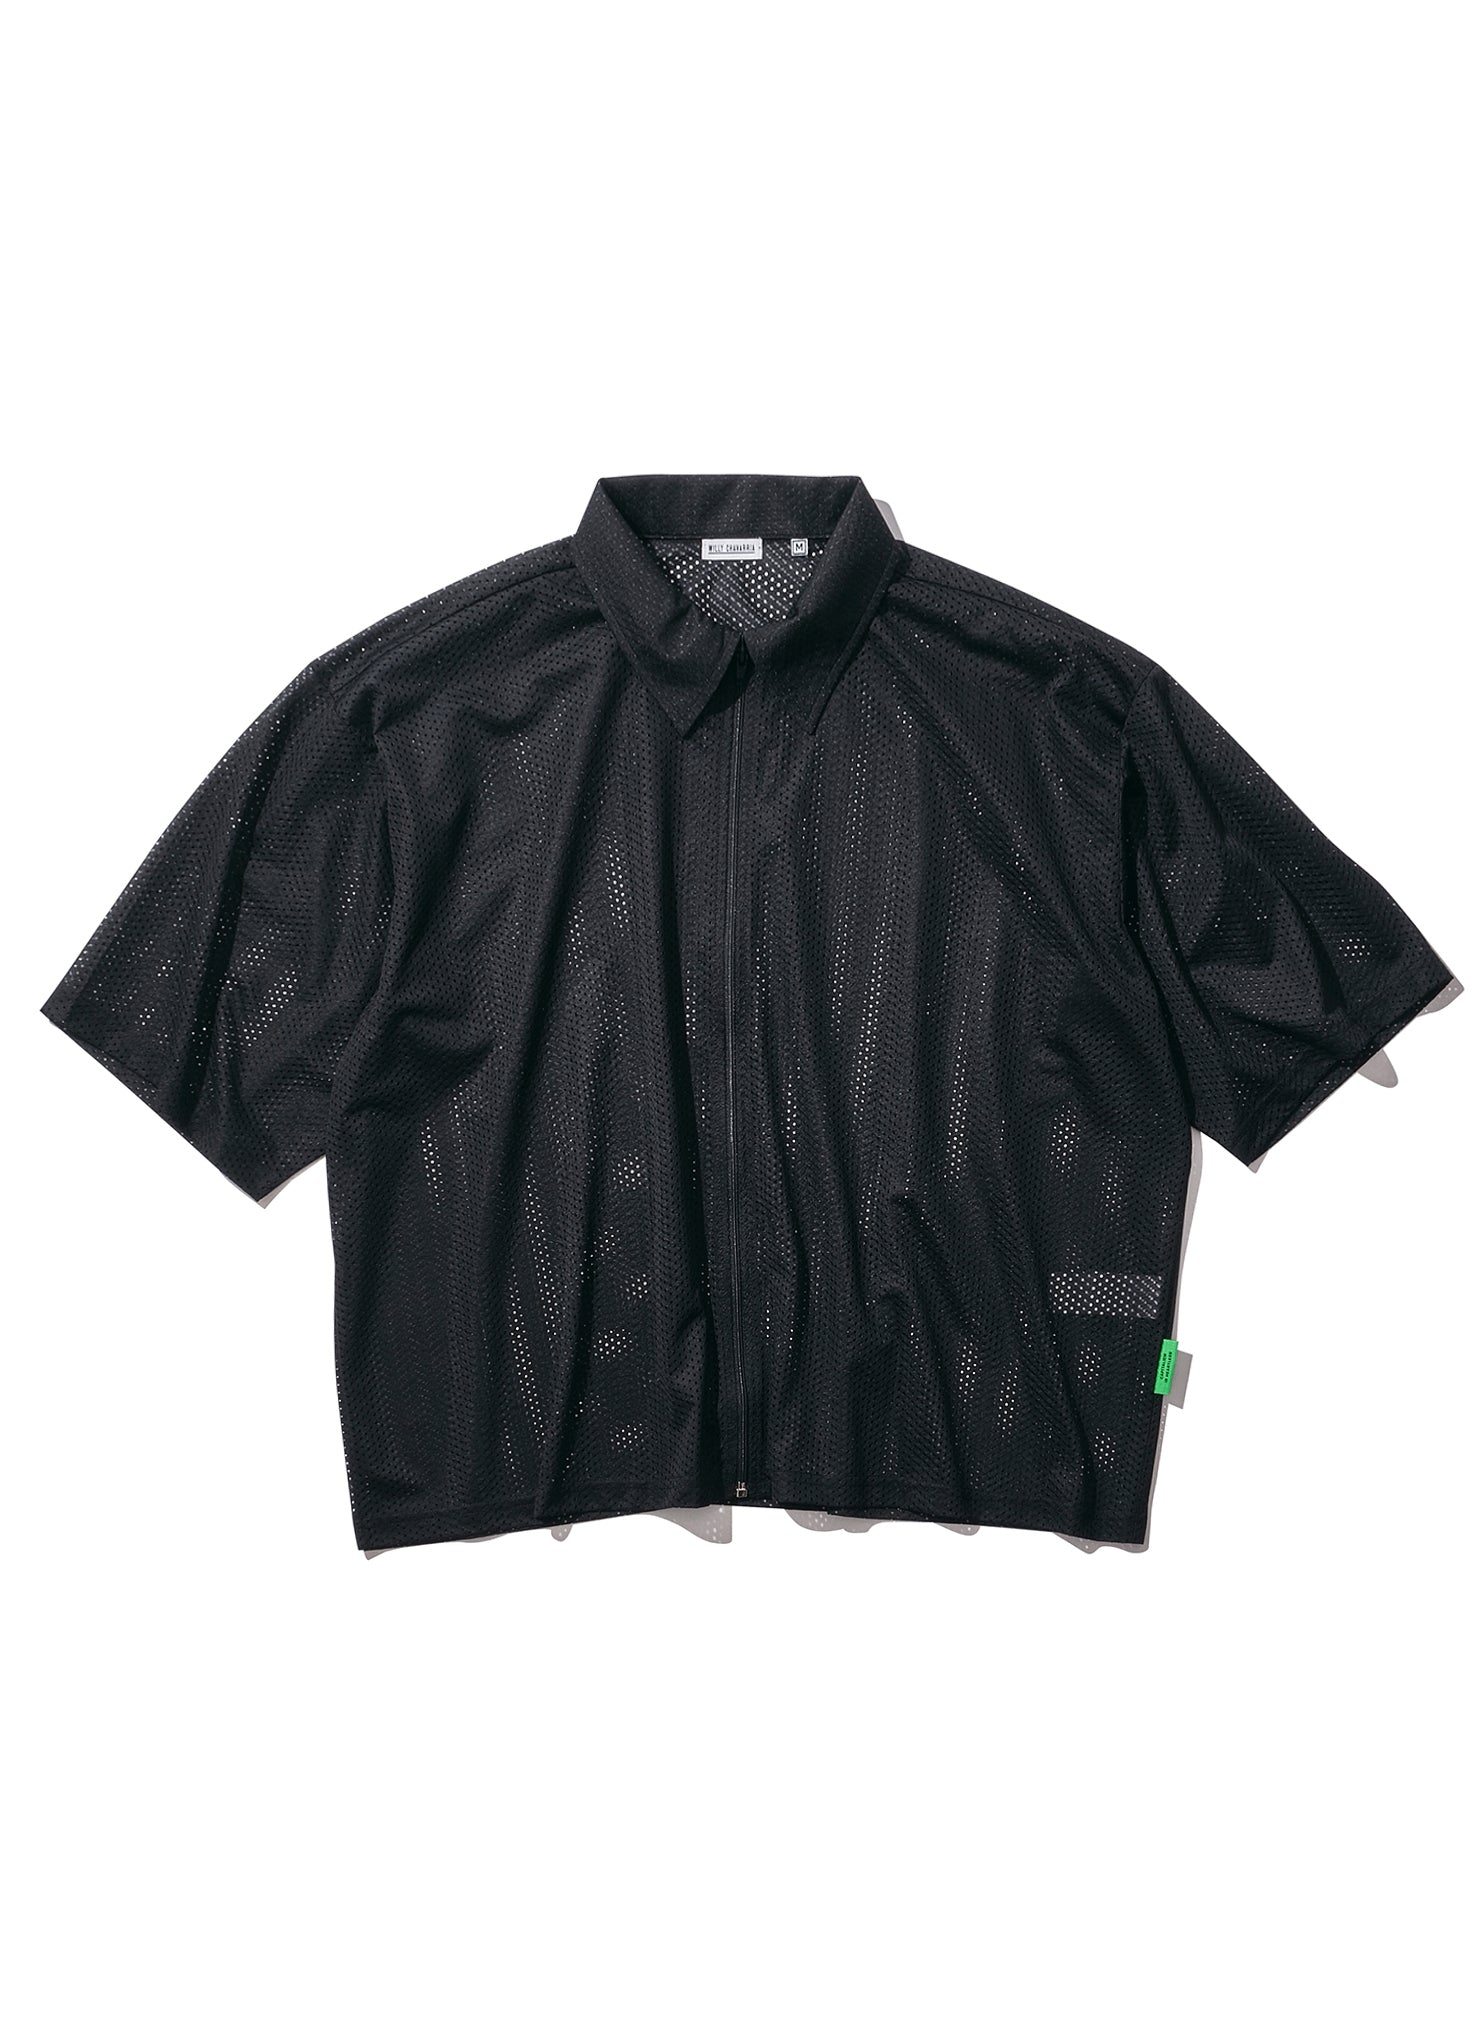 【CCTB Exclusive】WILLY CHAVARRIA / MESH ZIP SHIRT SOLID BLACK